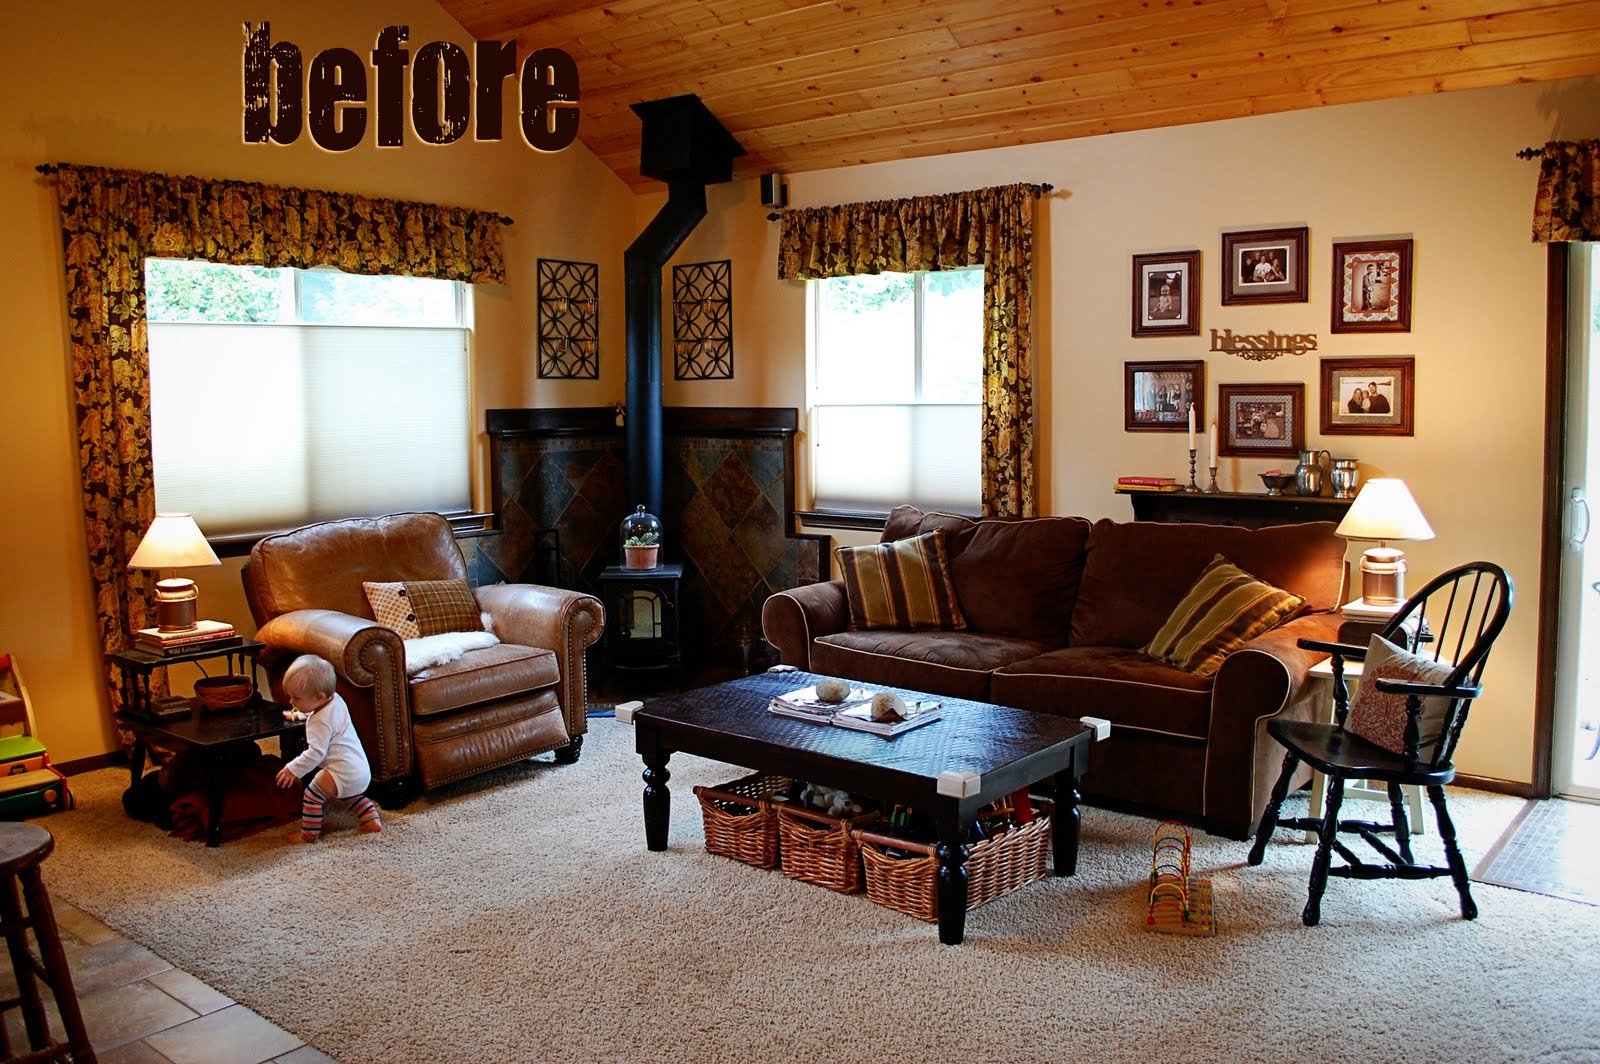 Living Room Decor with Fireplace Will Work for Decor Reader Poll